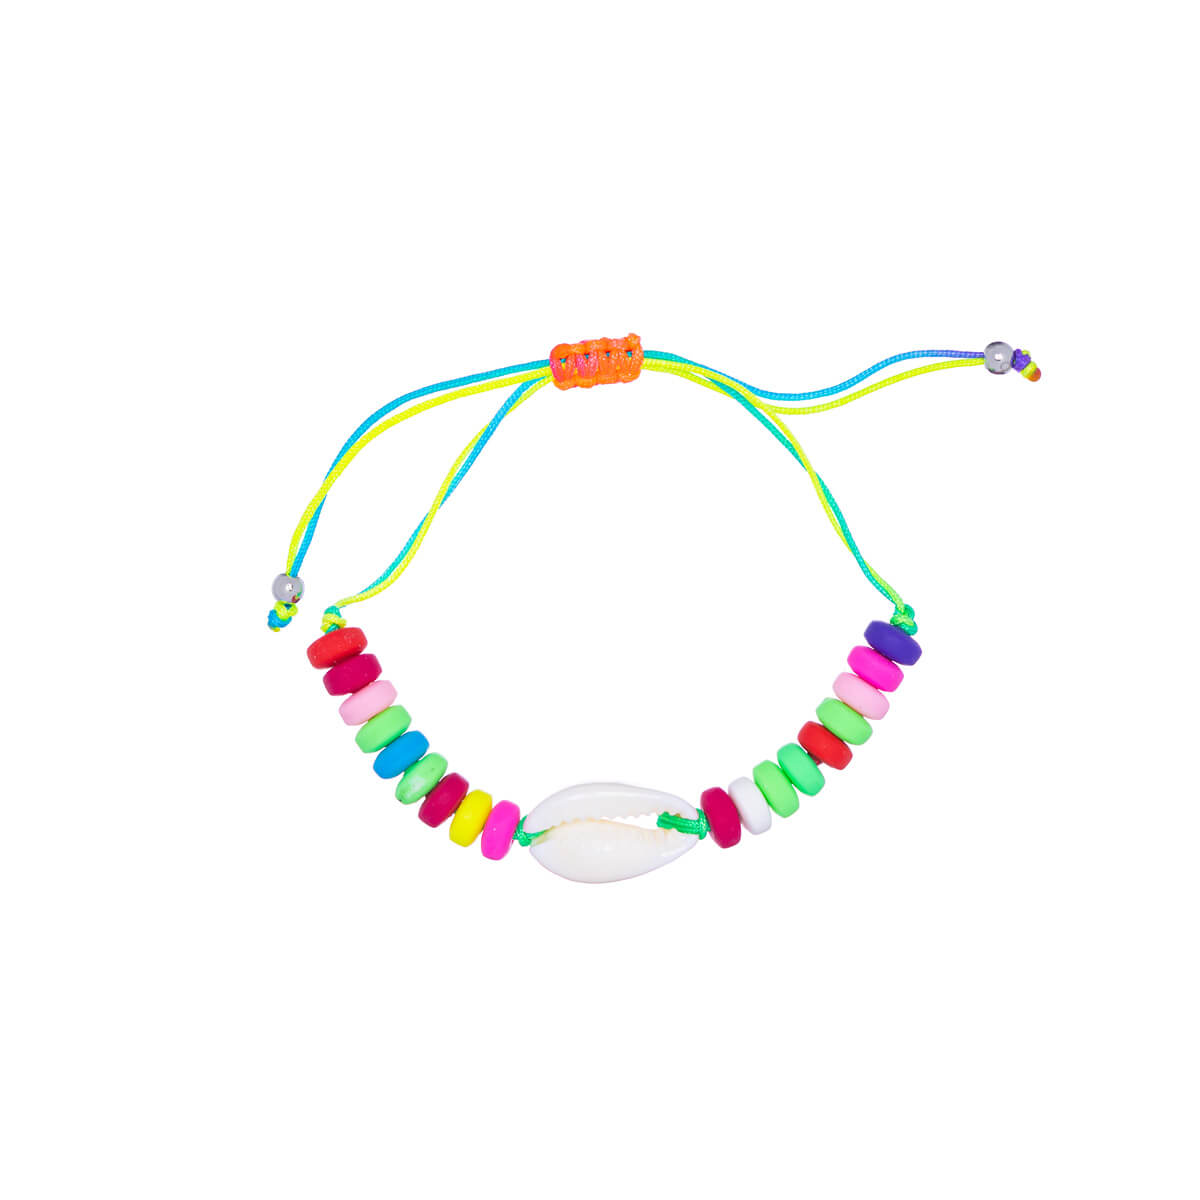 Clam bracelet with coloured beads